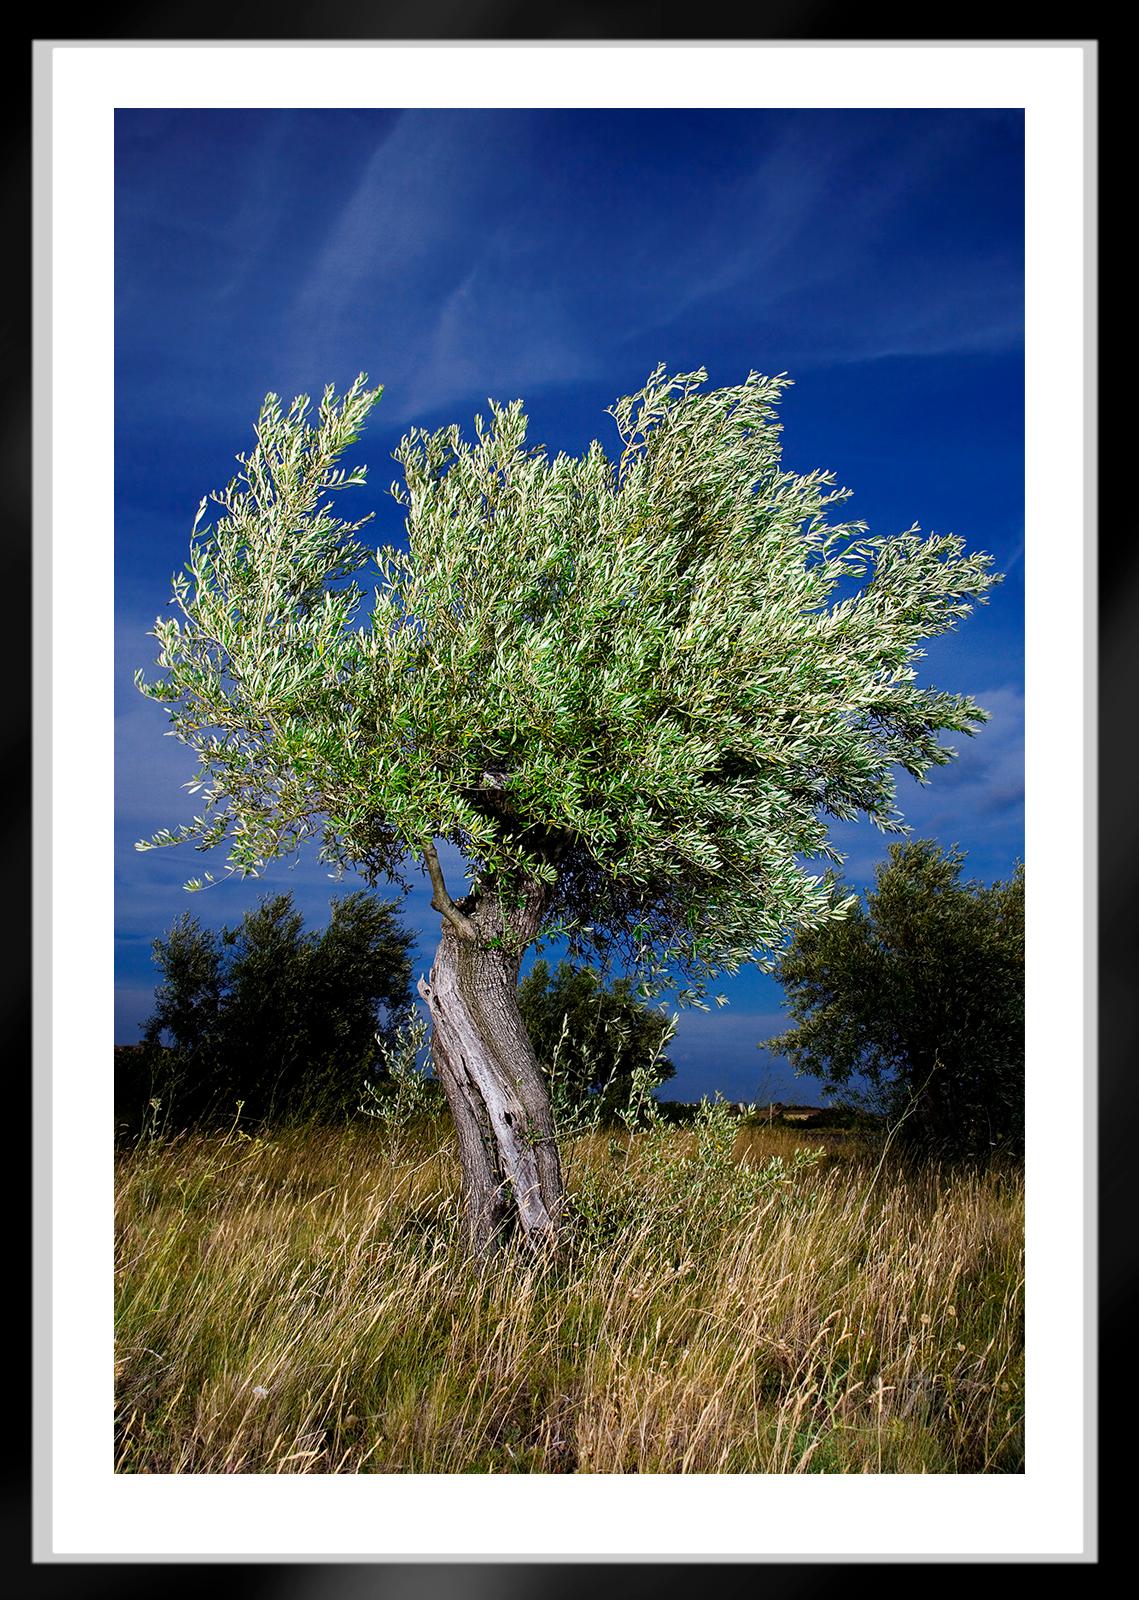 Olivier-Signed limited edition still life print, Colour nature photo, Landscape  - Photograph by Ian Sanderson